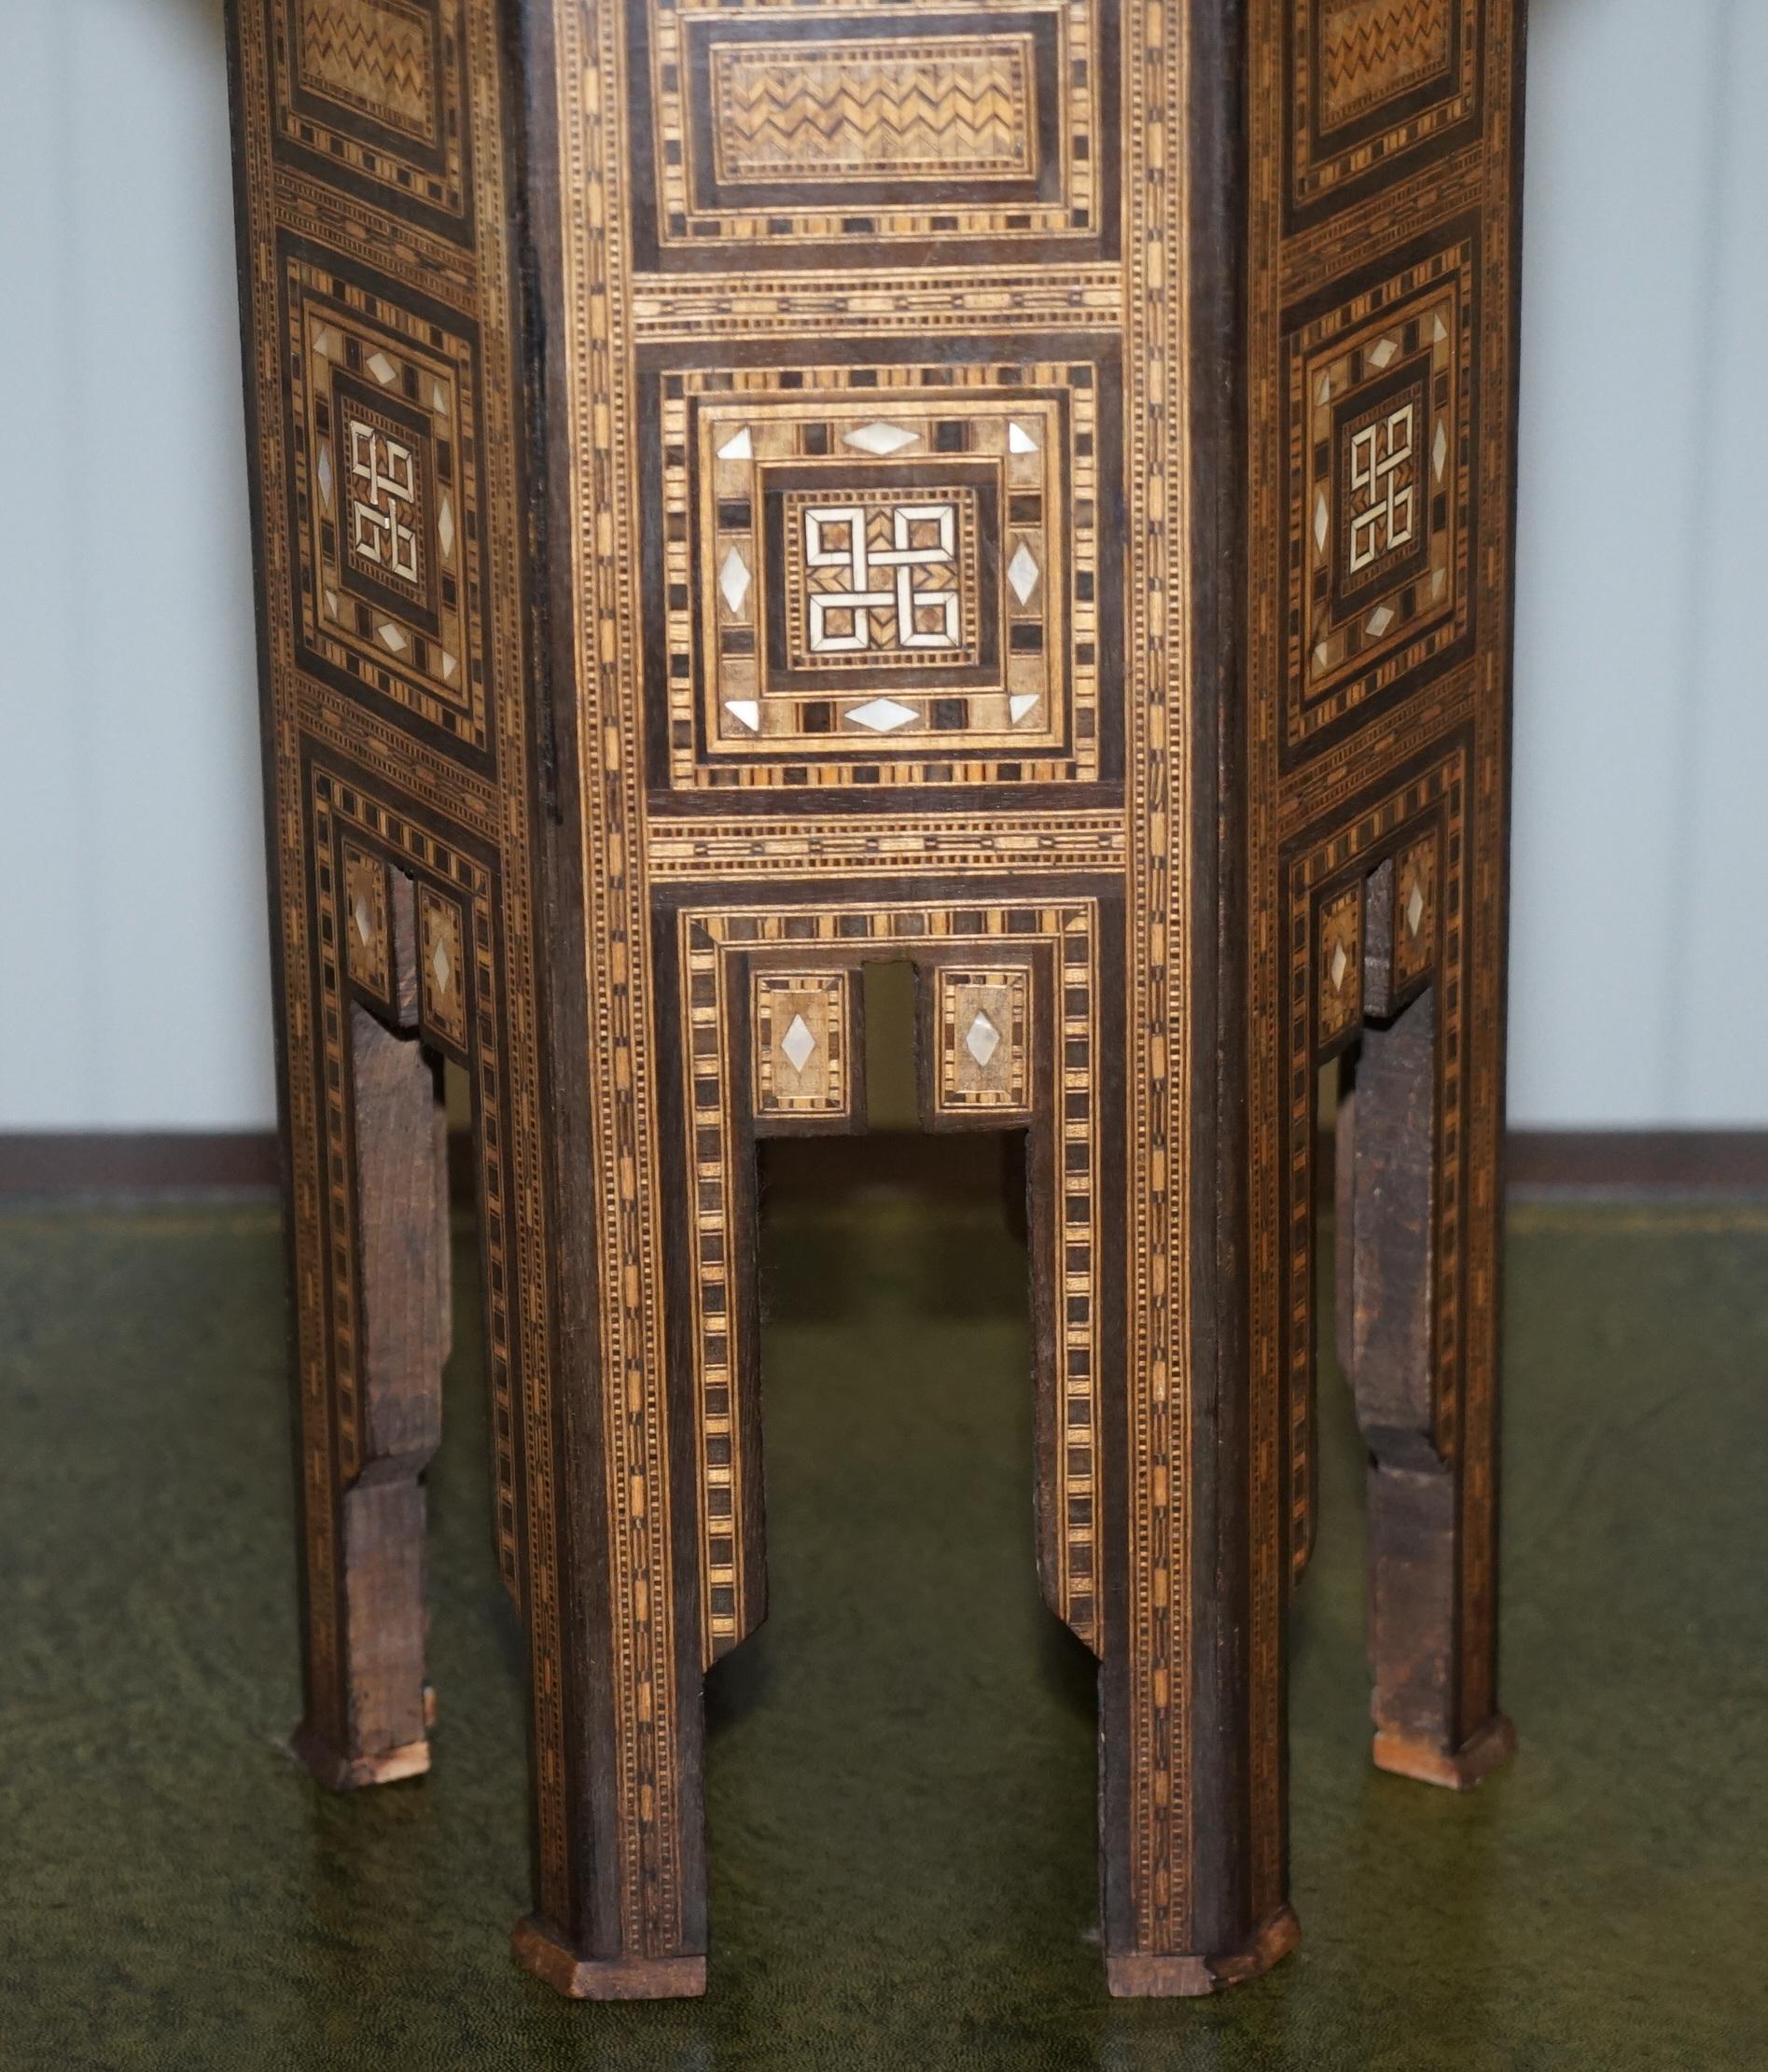 Syrian Rare circa 1900 Marquetry Inlaid Side Table Retailed Through Liberty's London